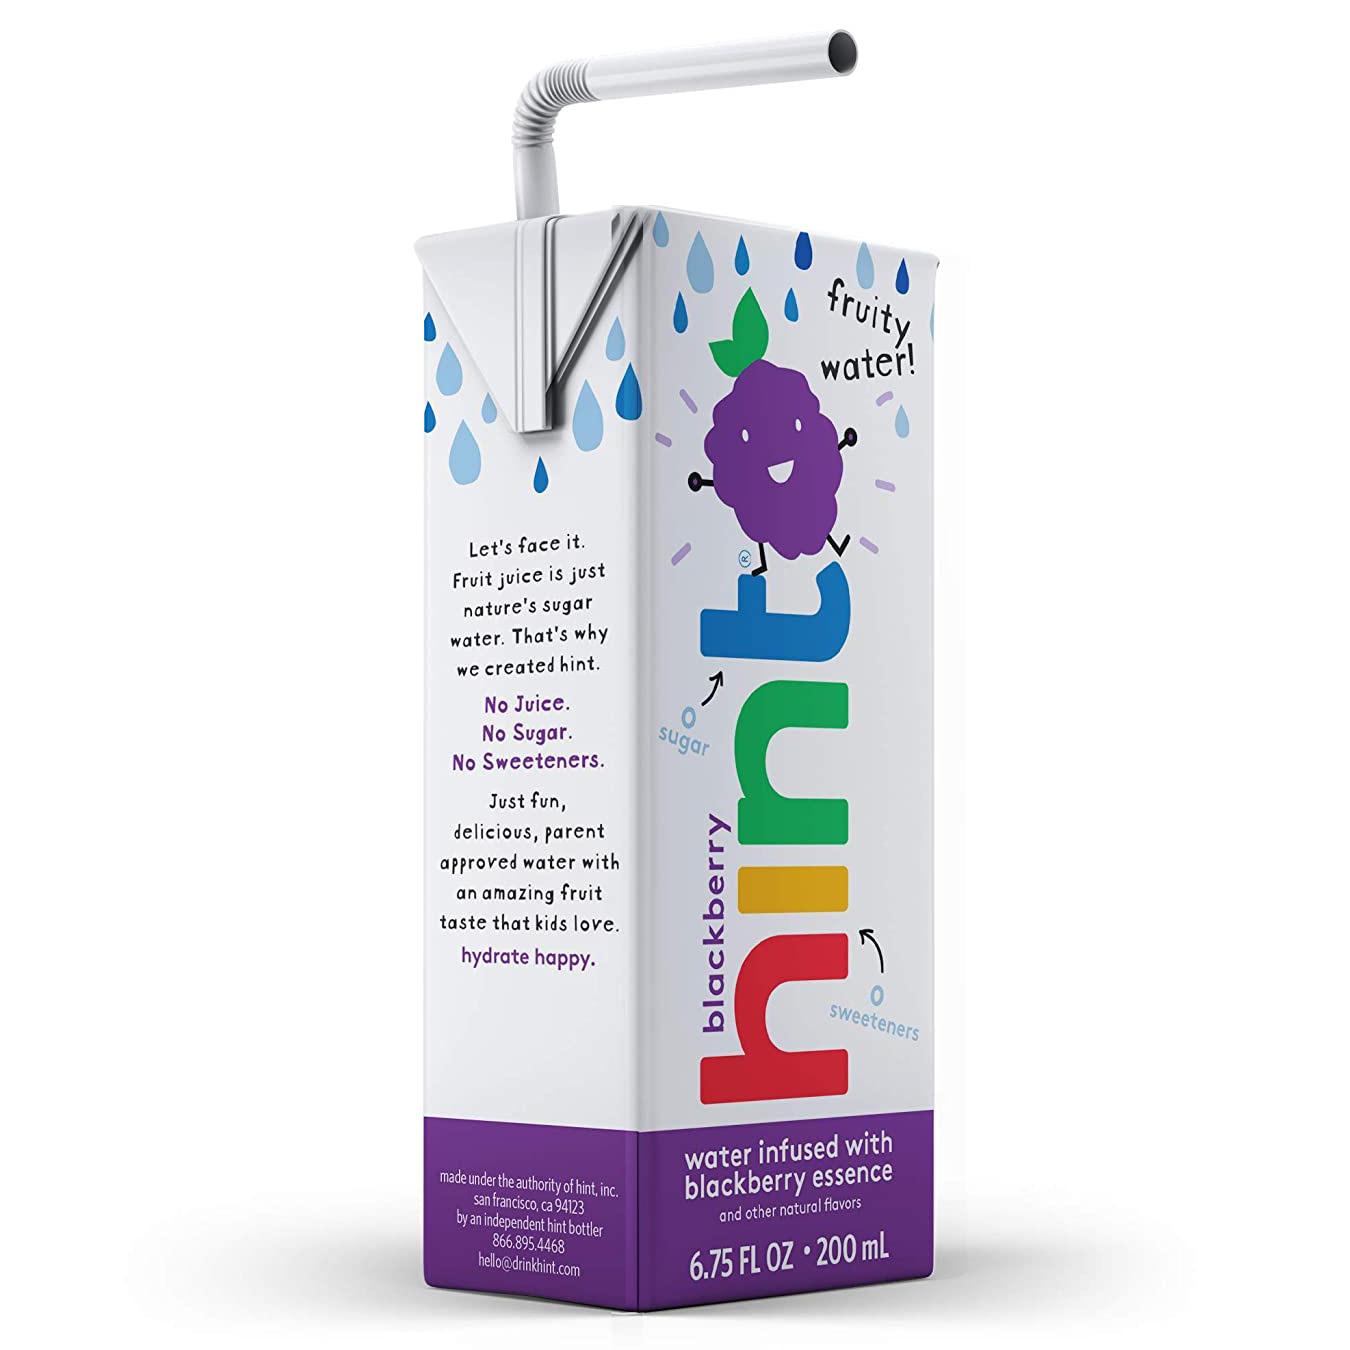 8 Hint Kids Water Blackberry for $4.74 Shipped